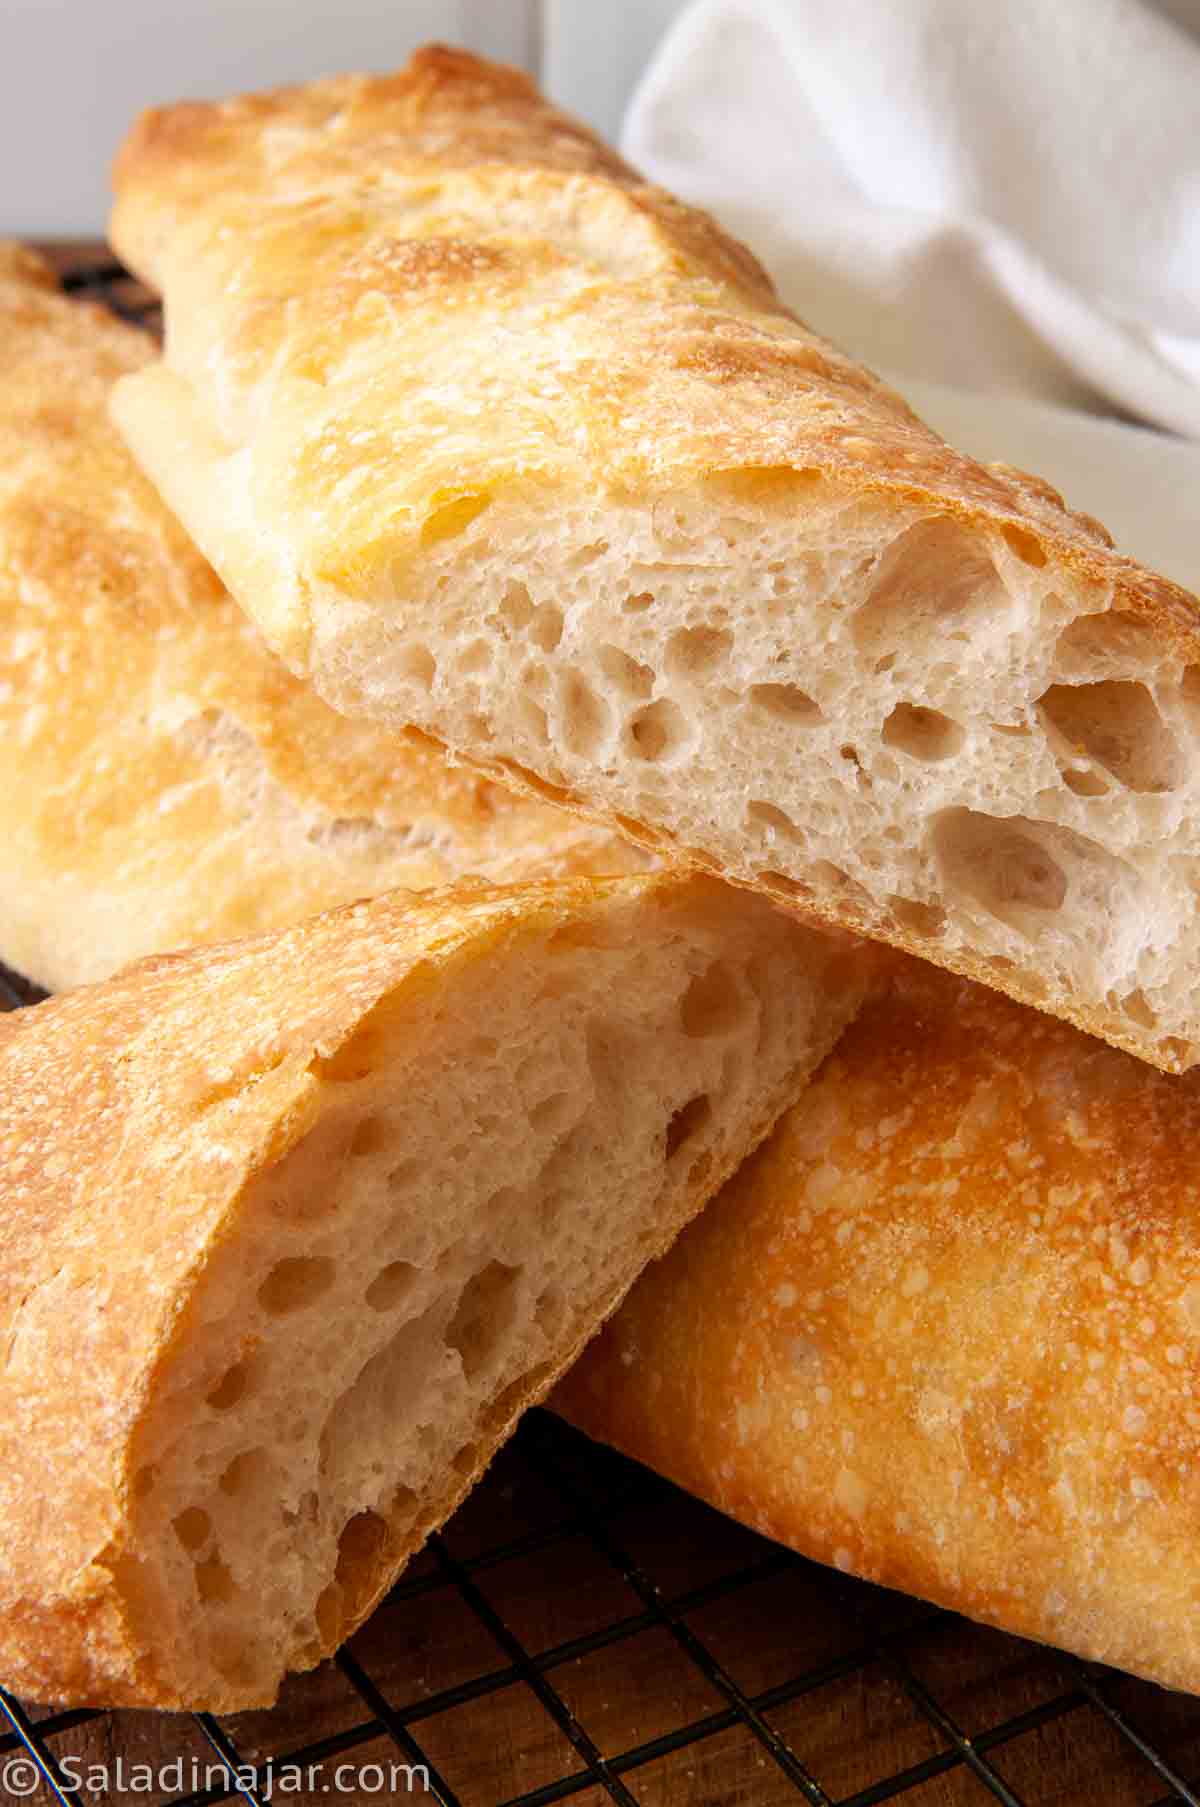 slices of ciabatta showing lots of holes and tunnels under a golden crust